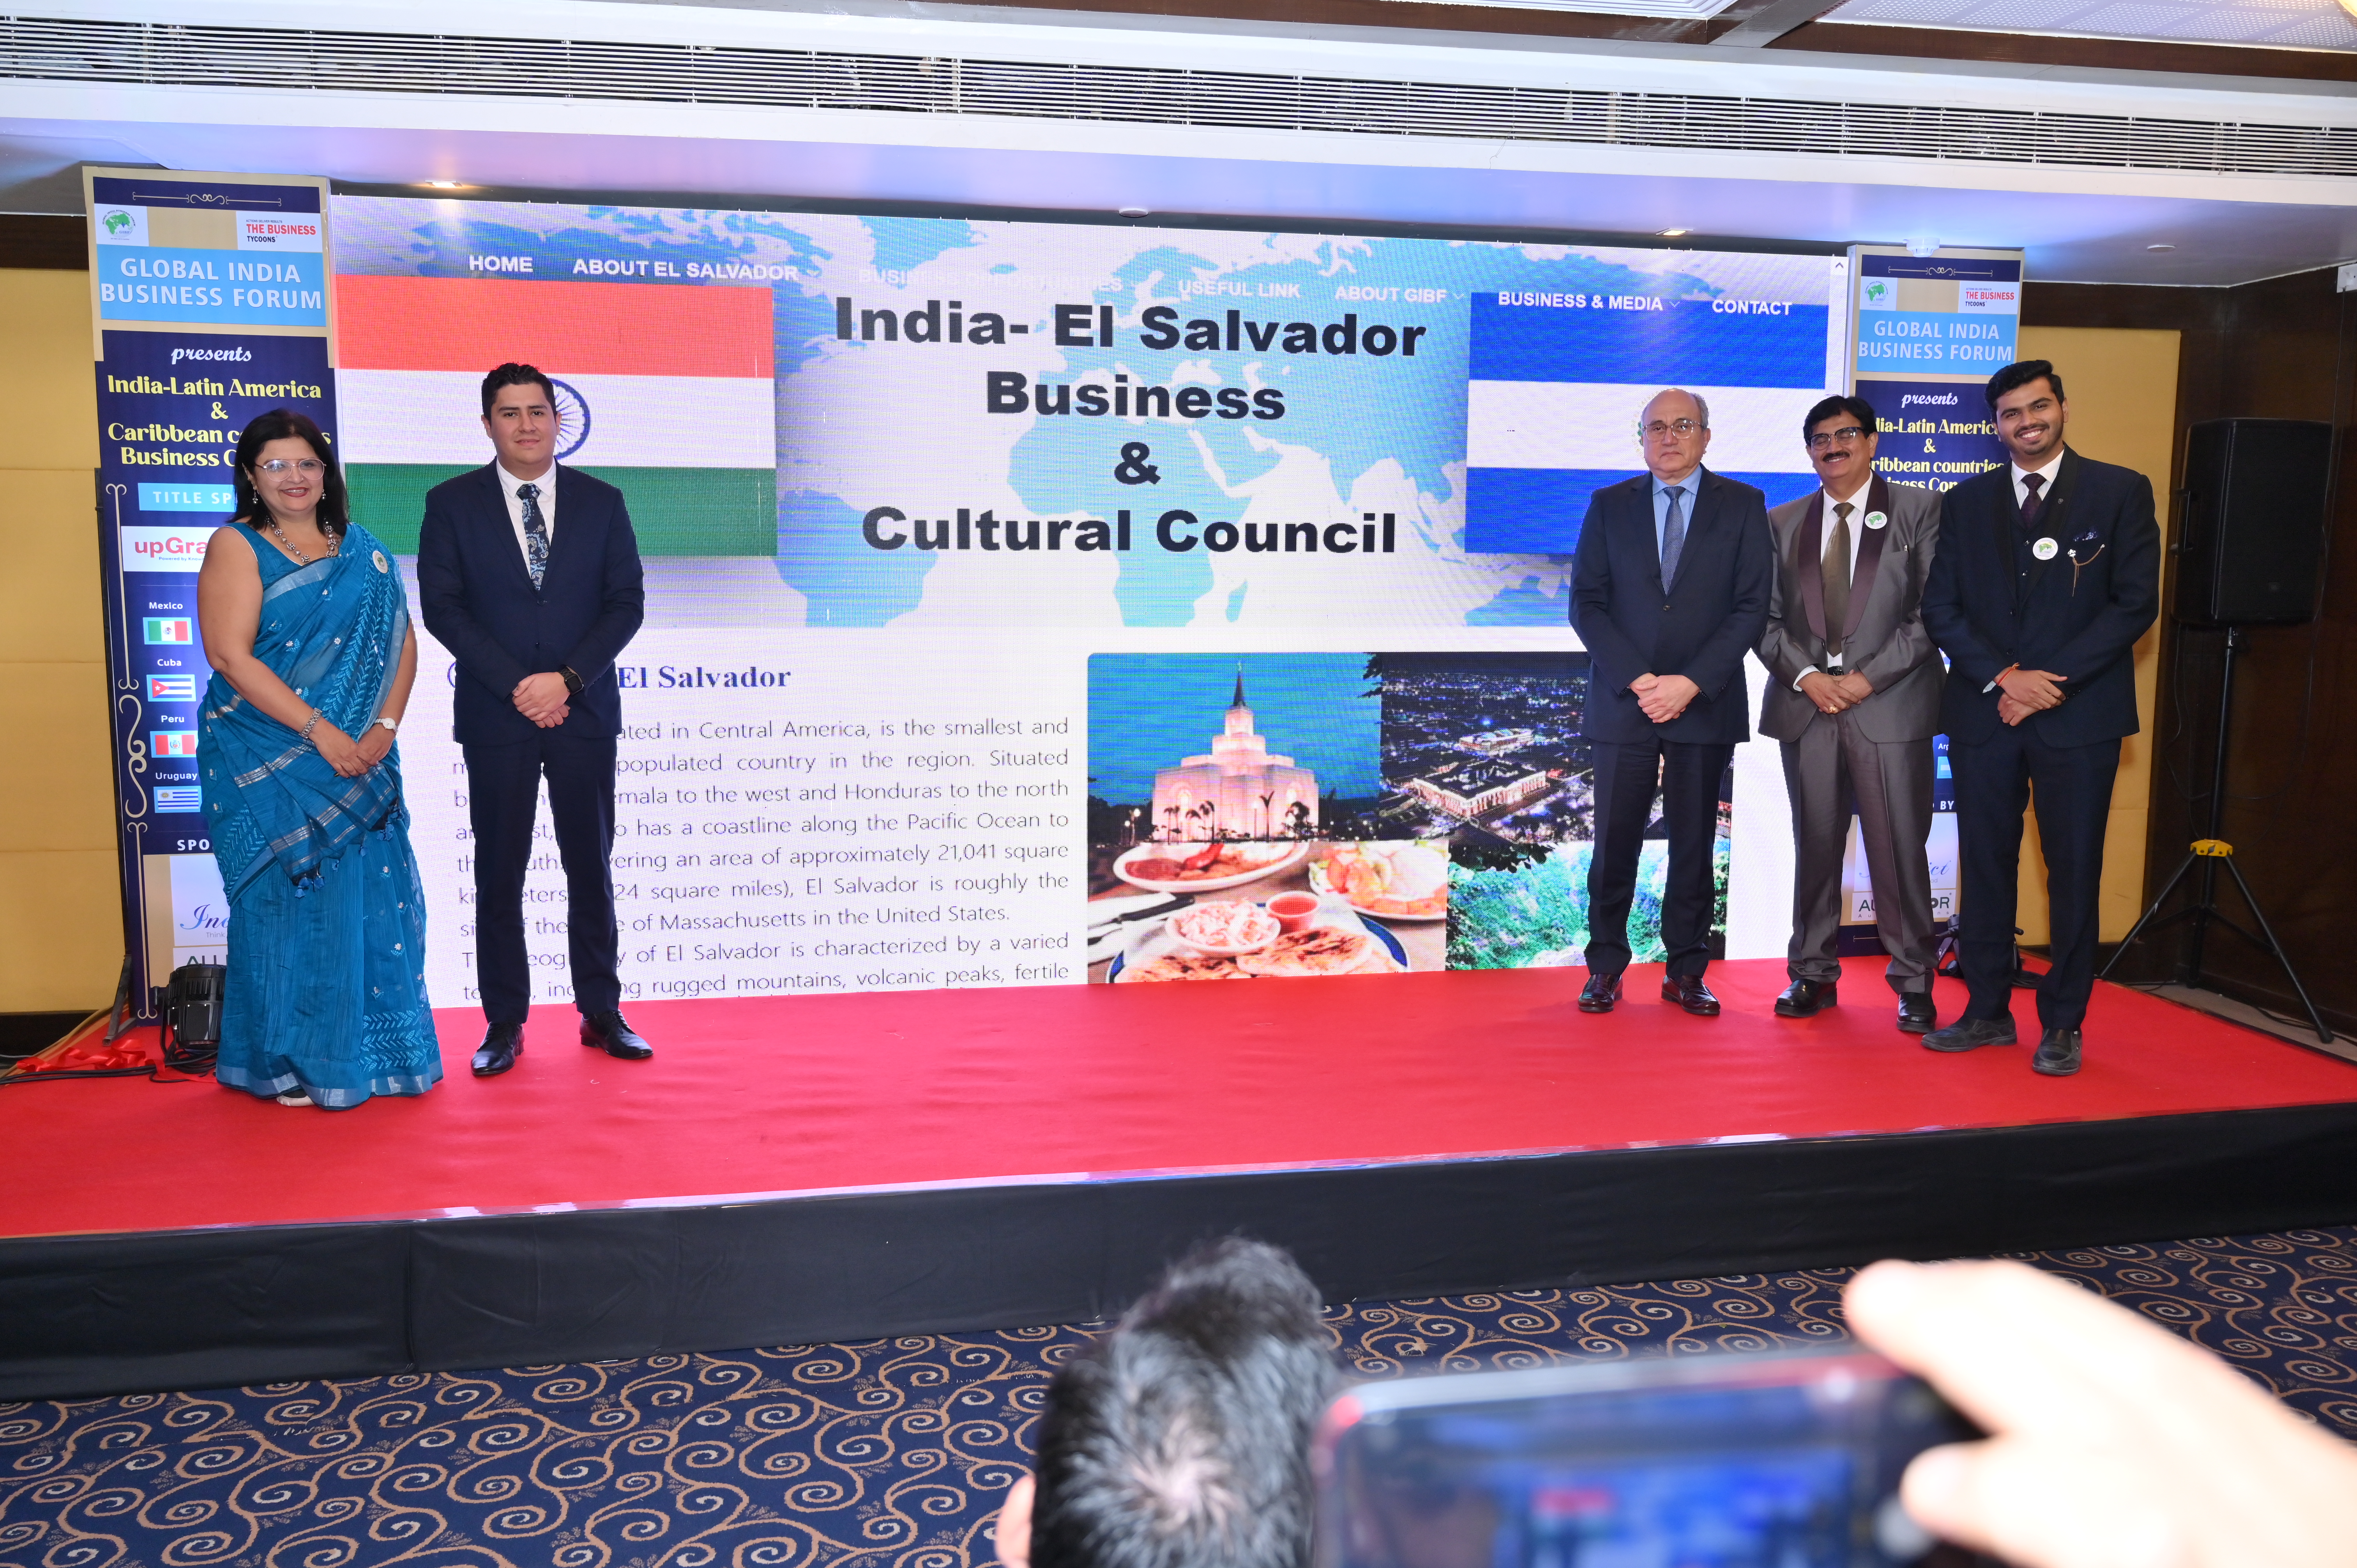 gibf-past-event-india-latin-america-and-caribbean-country-business-conclave-el-salvard-website-of-india-el-salvador-business-and-cultural-council-2024